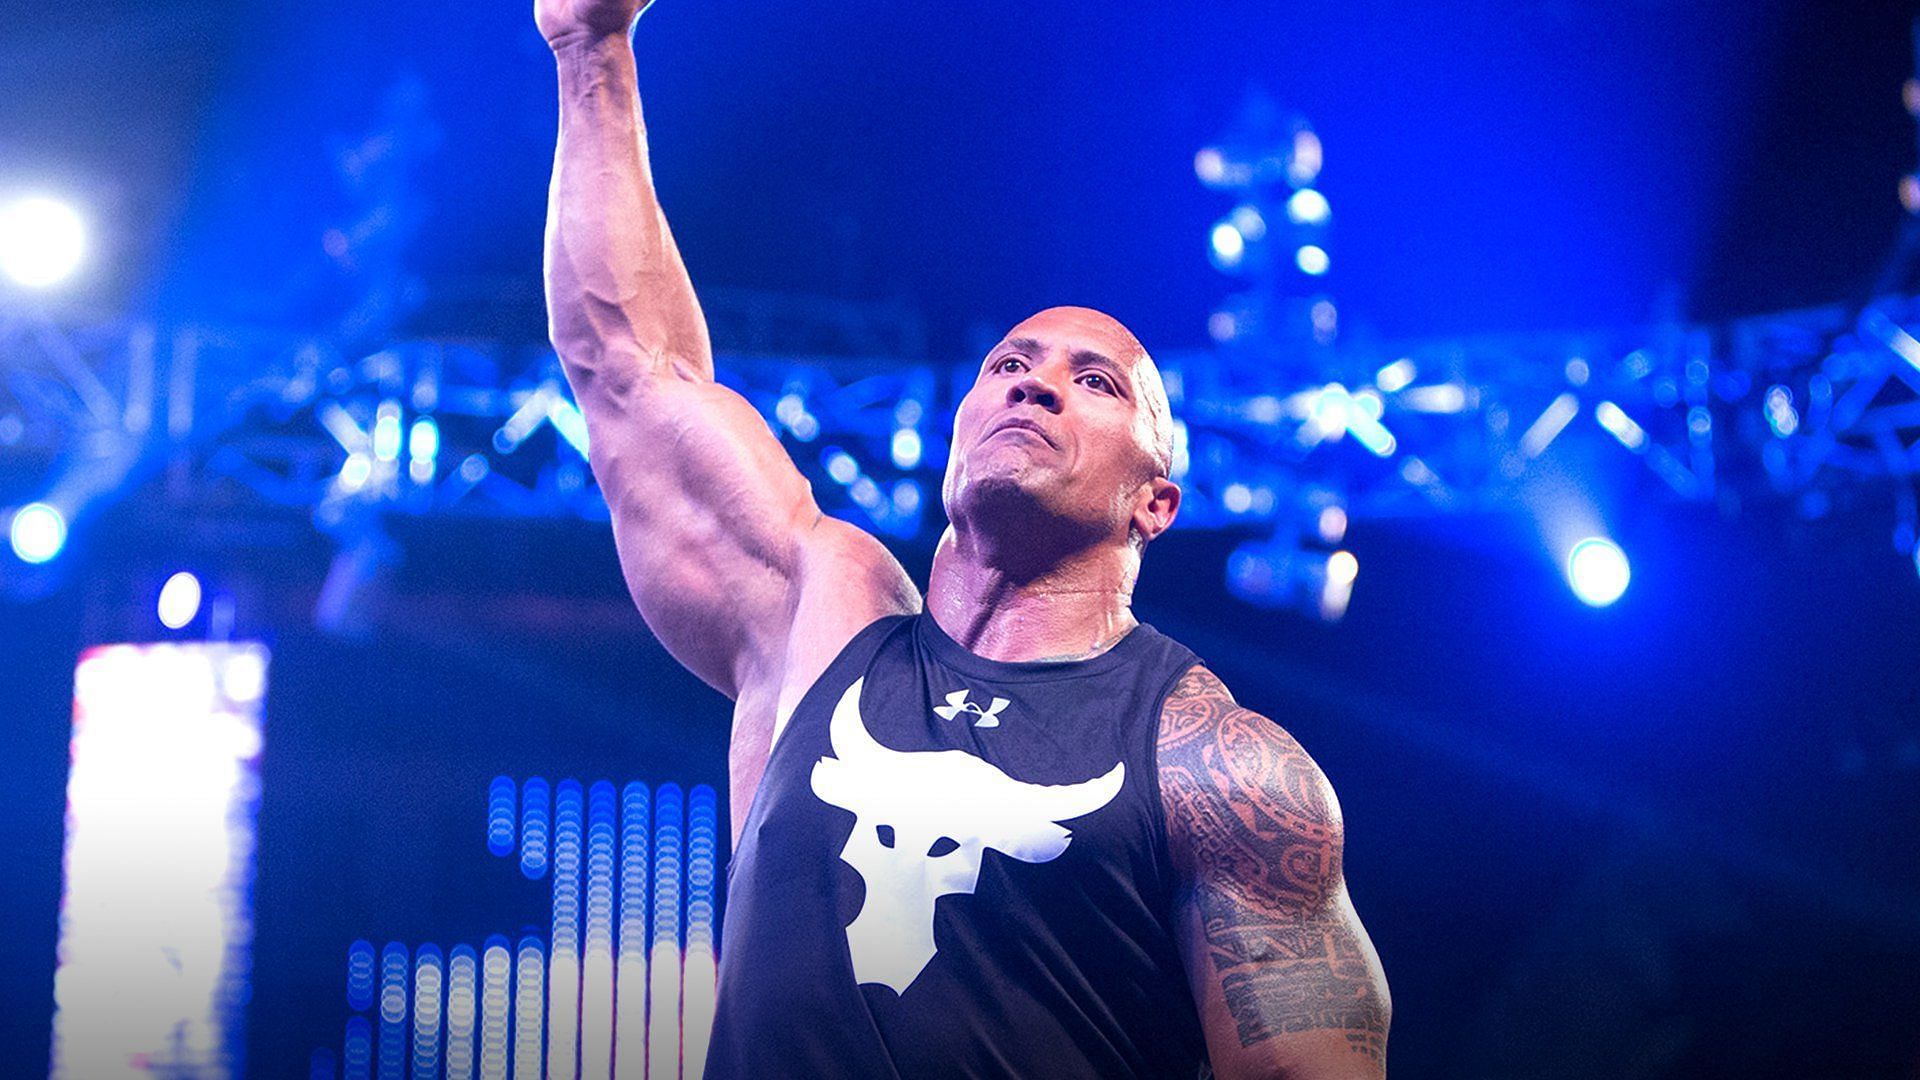 Will The Rock have another huge match in WWE?